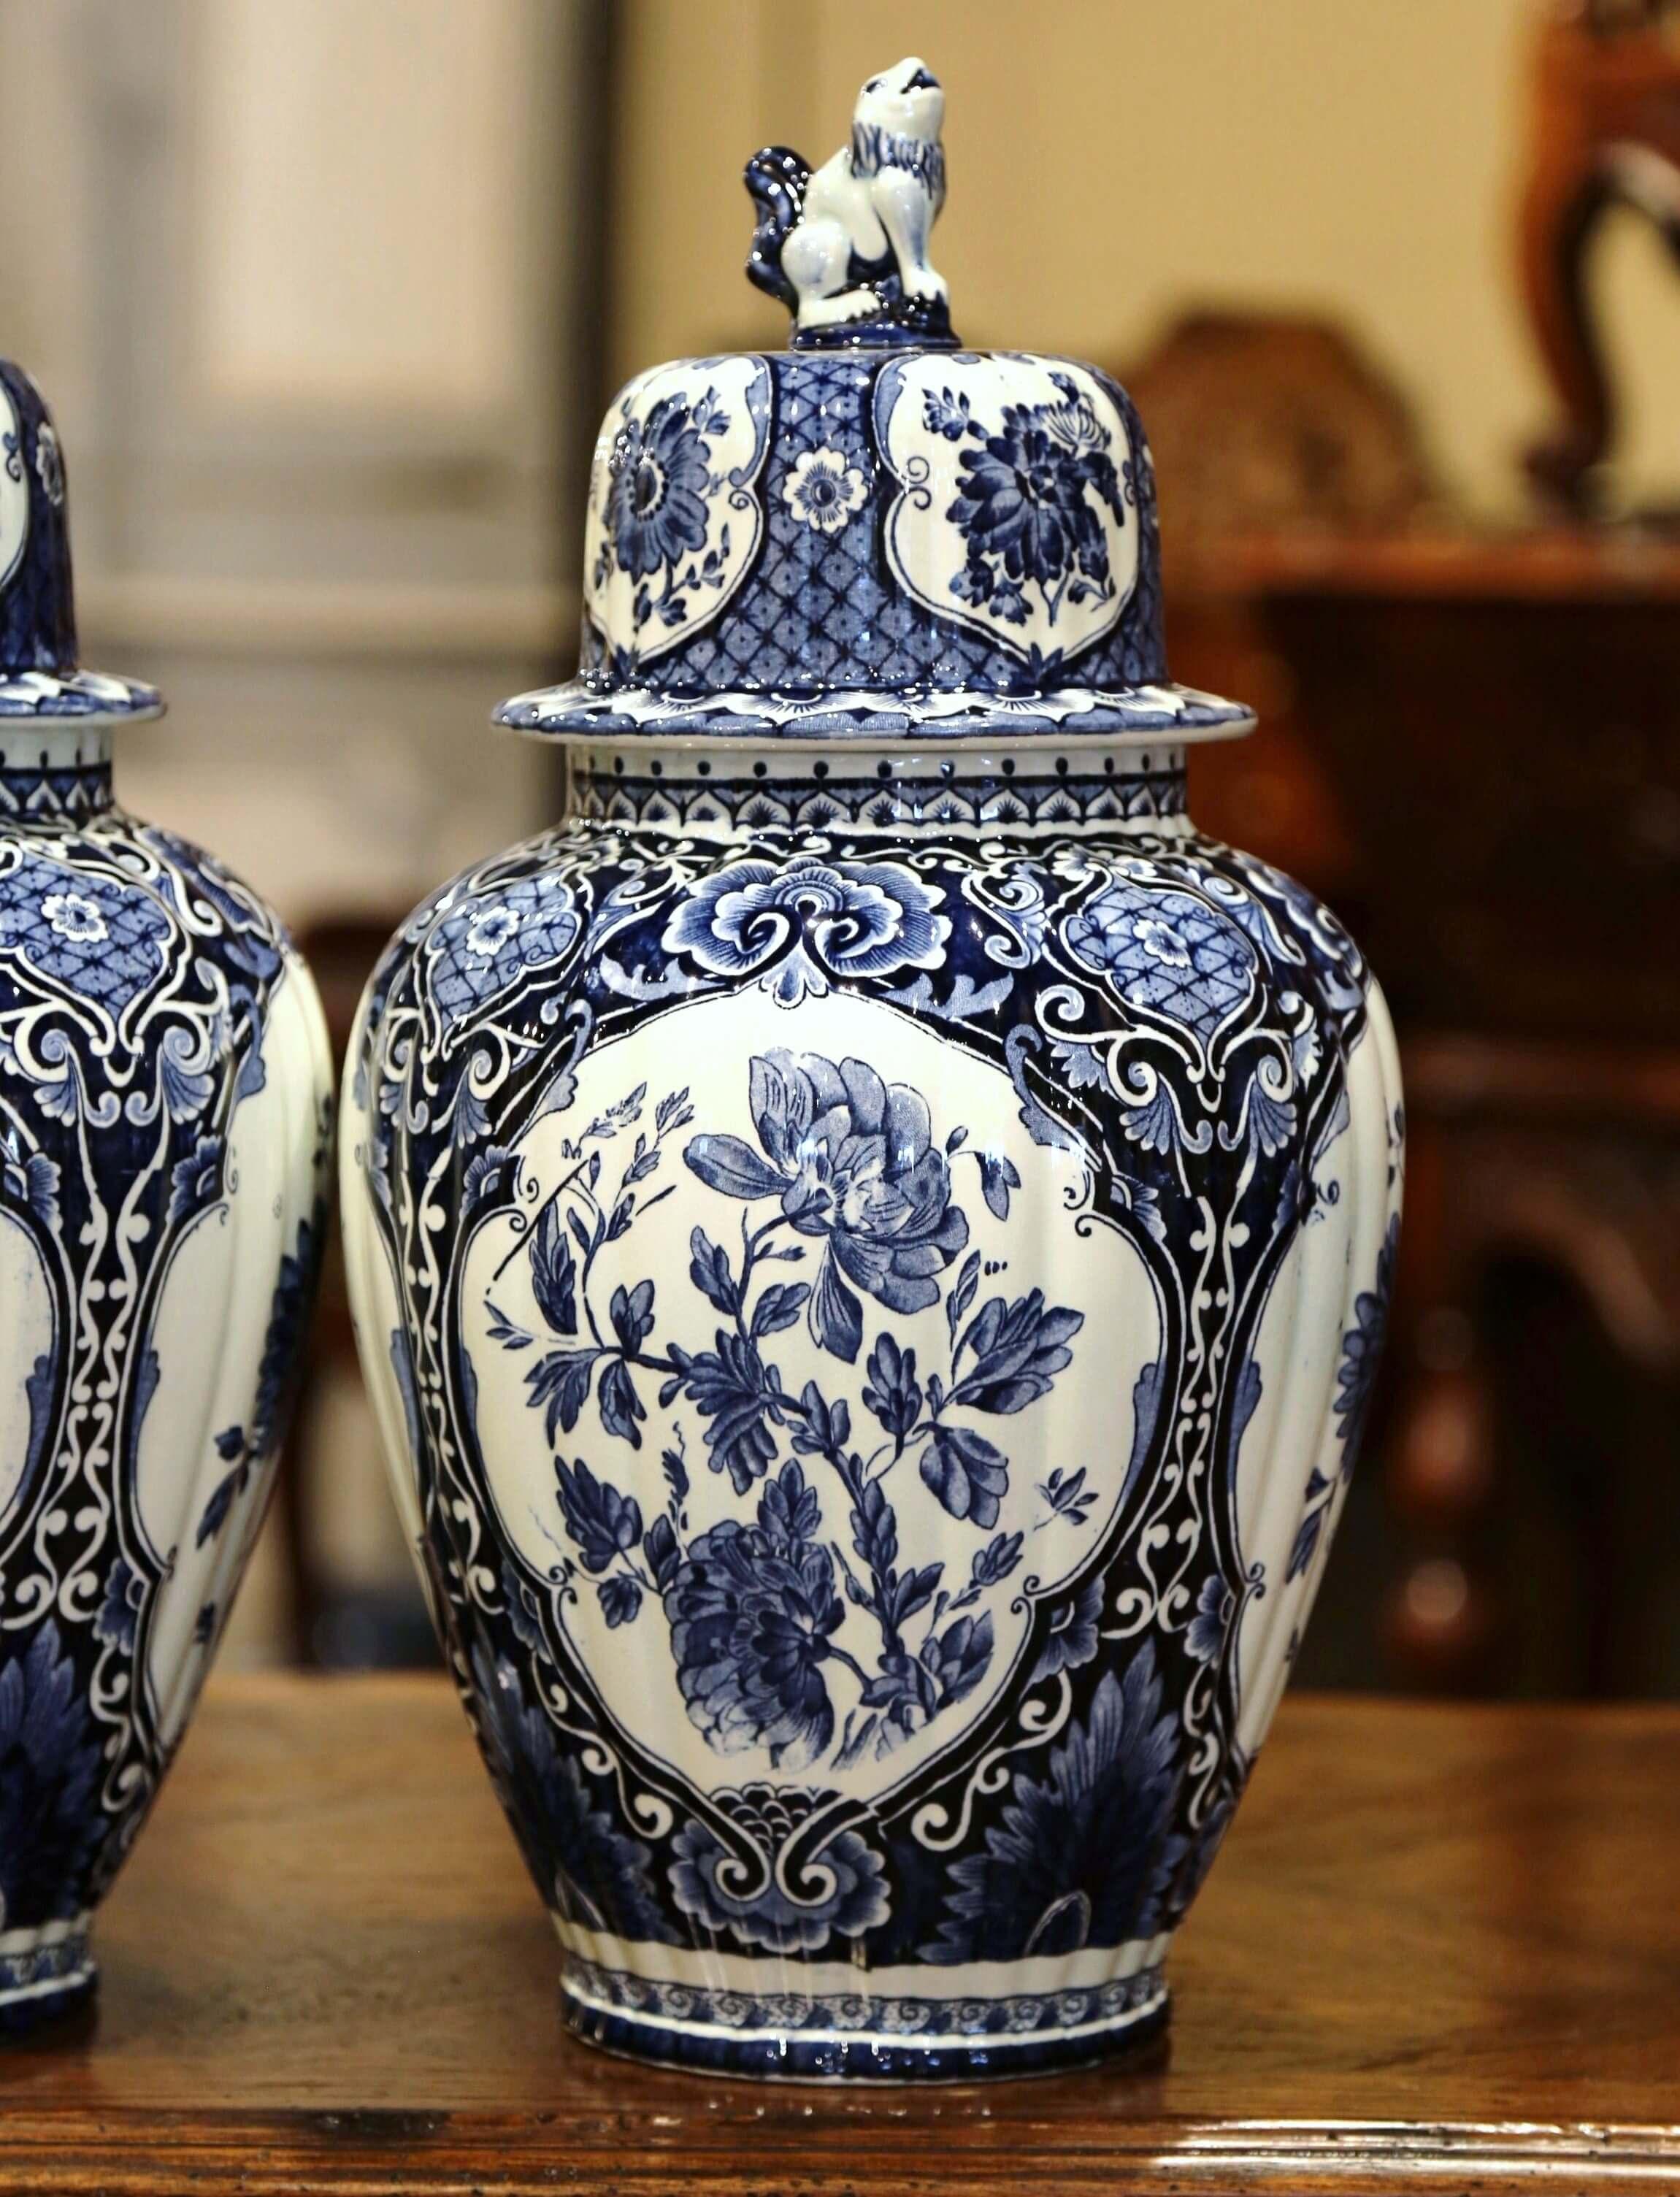 Pair of Mid-20th Century Dutch Painted Blue and White Faience Delft Ginger Jars 2